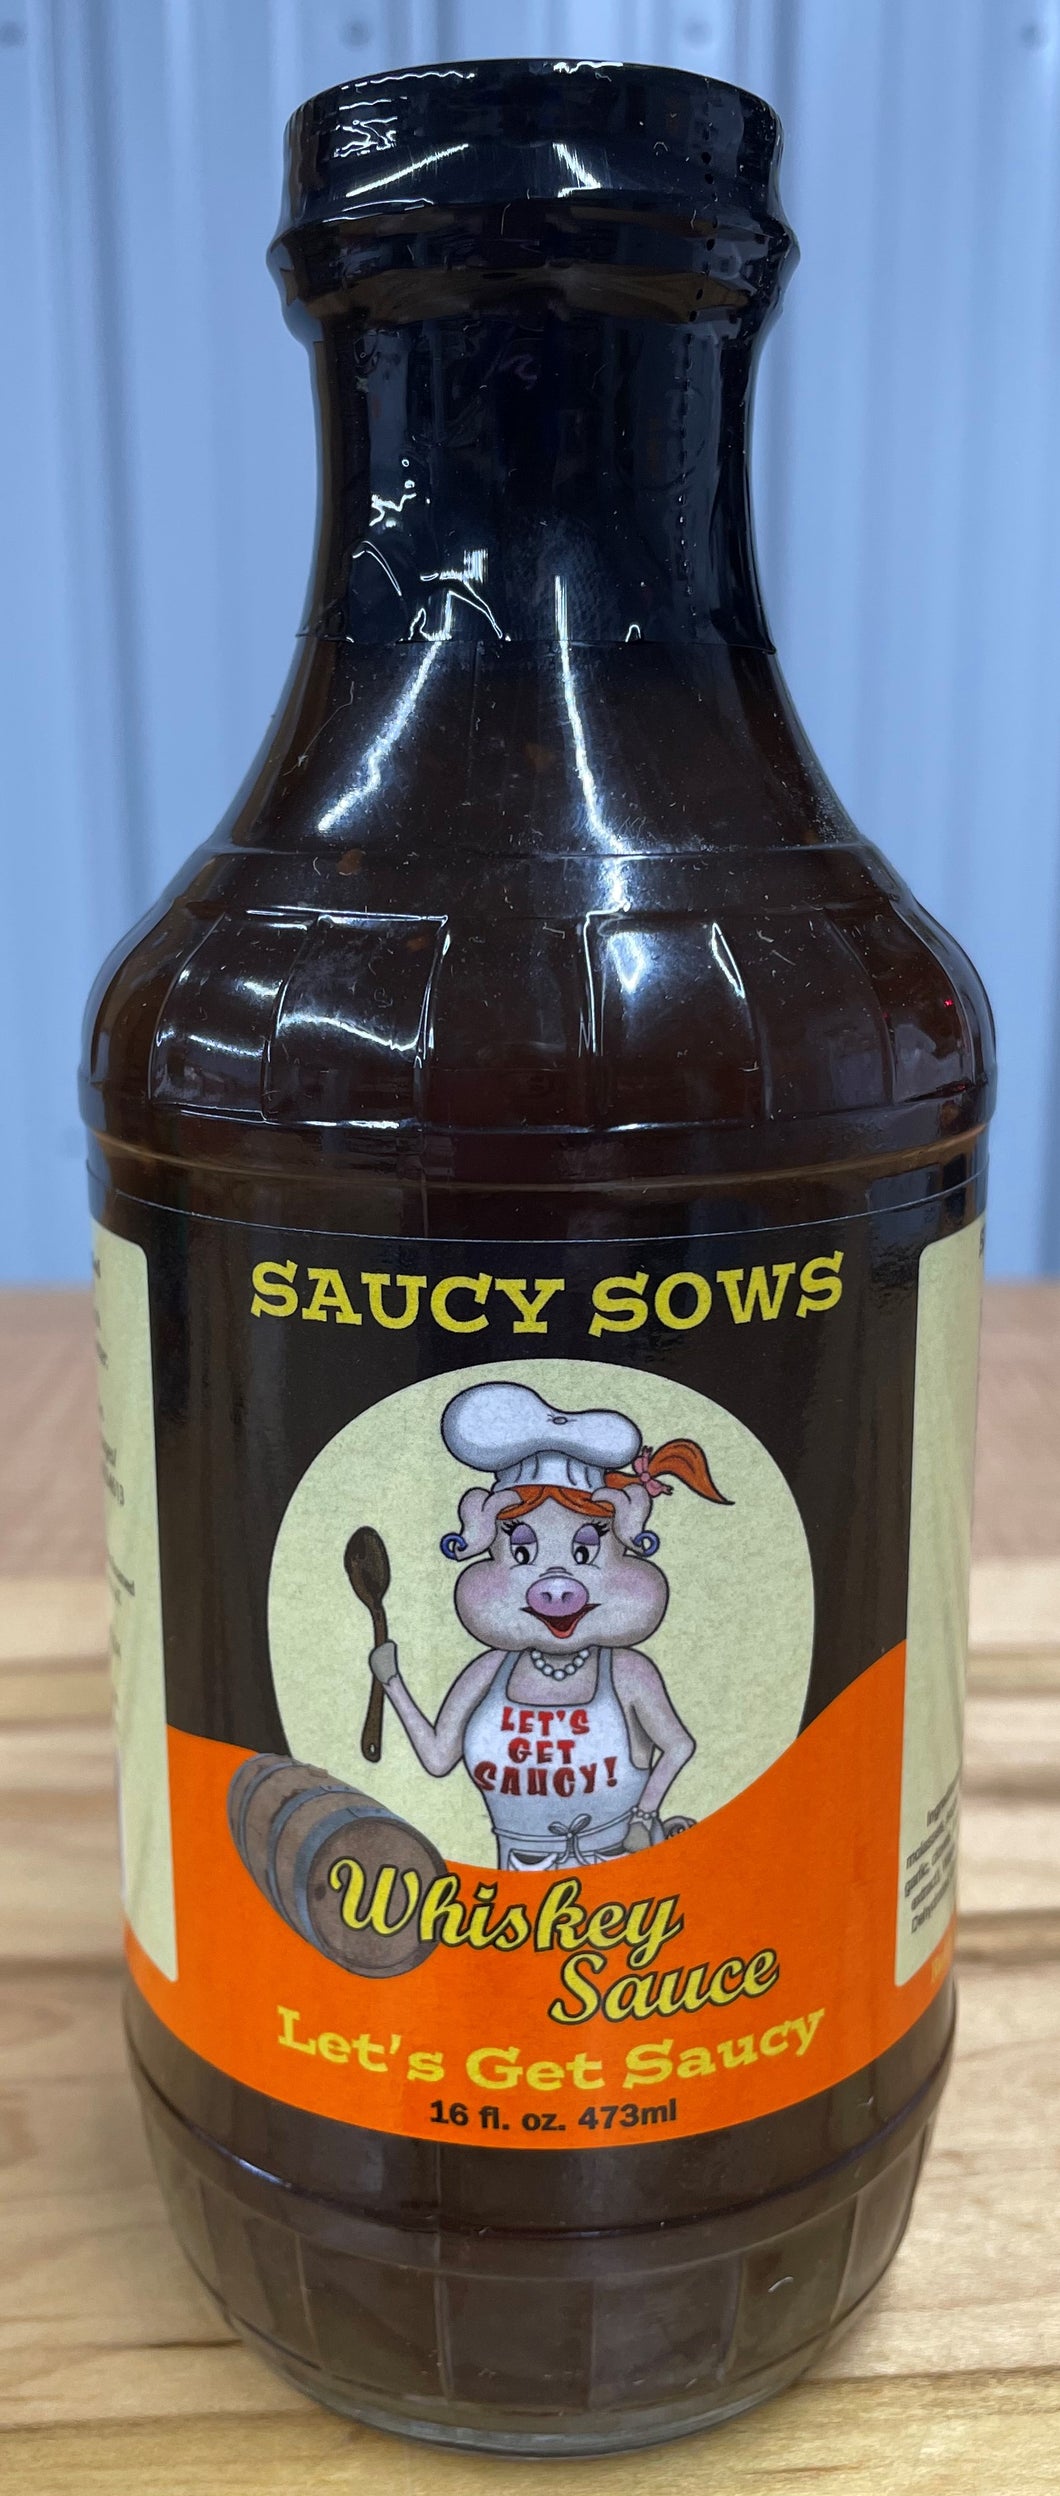 Saucy Sows Whiskey Sauce